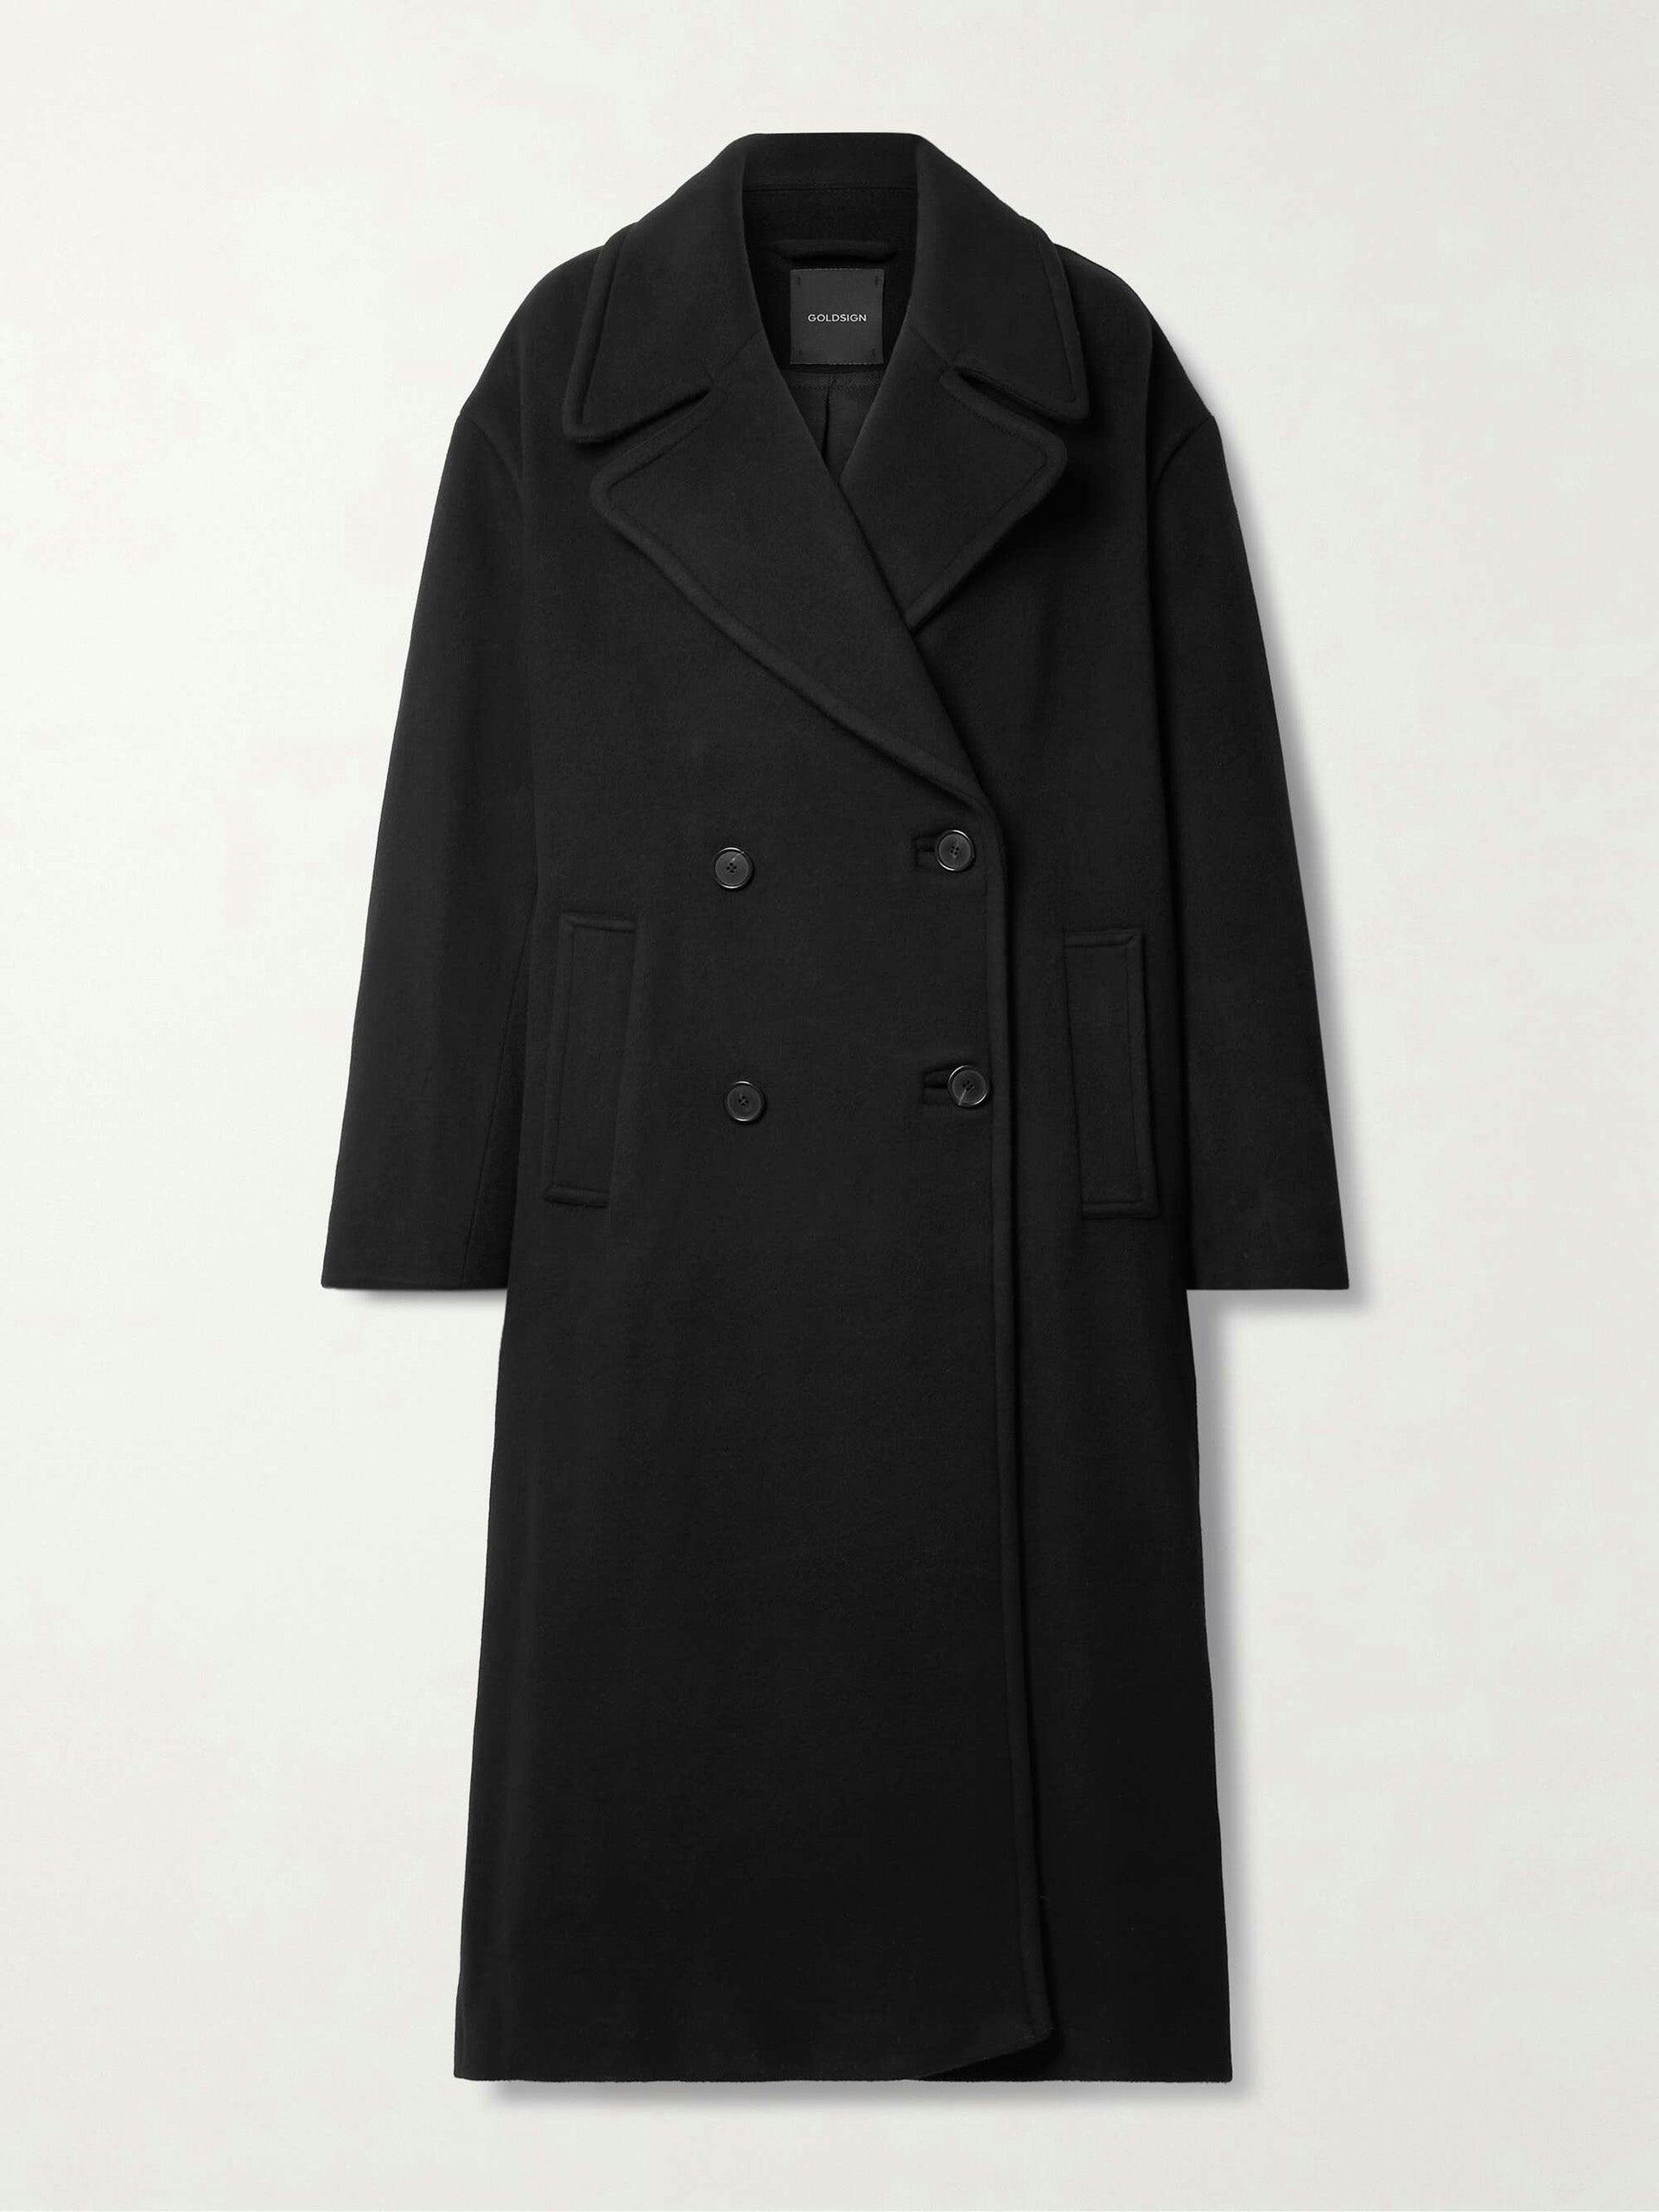 The Cocoon double-breasted wool-blend felt coat